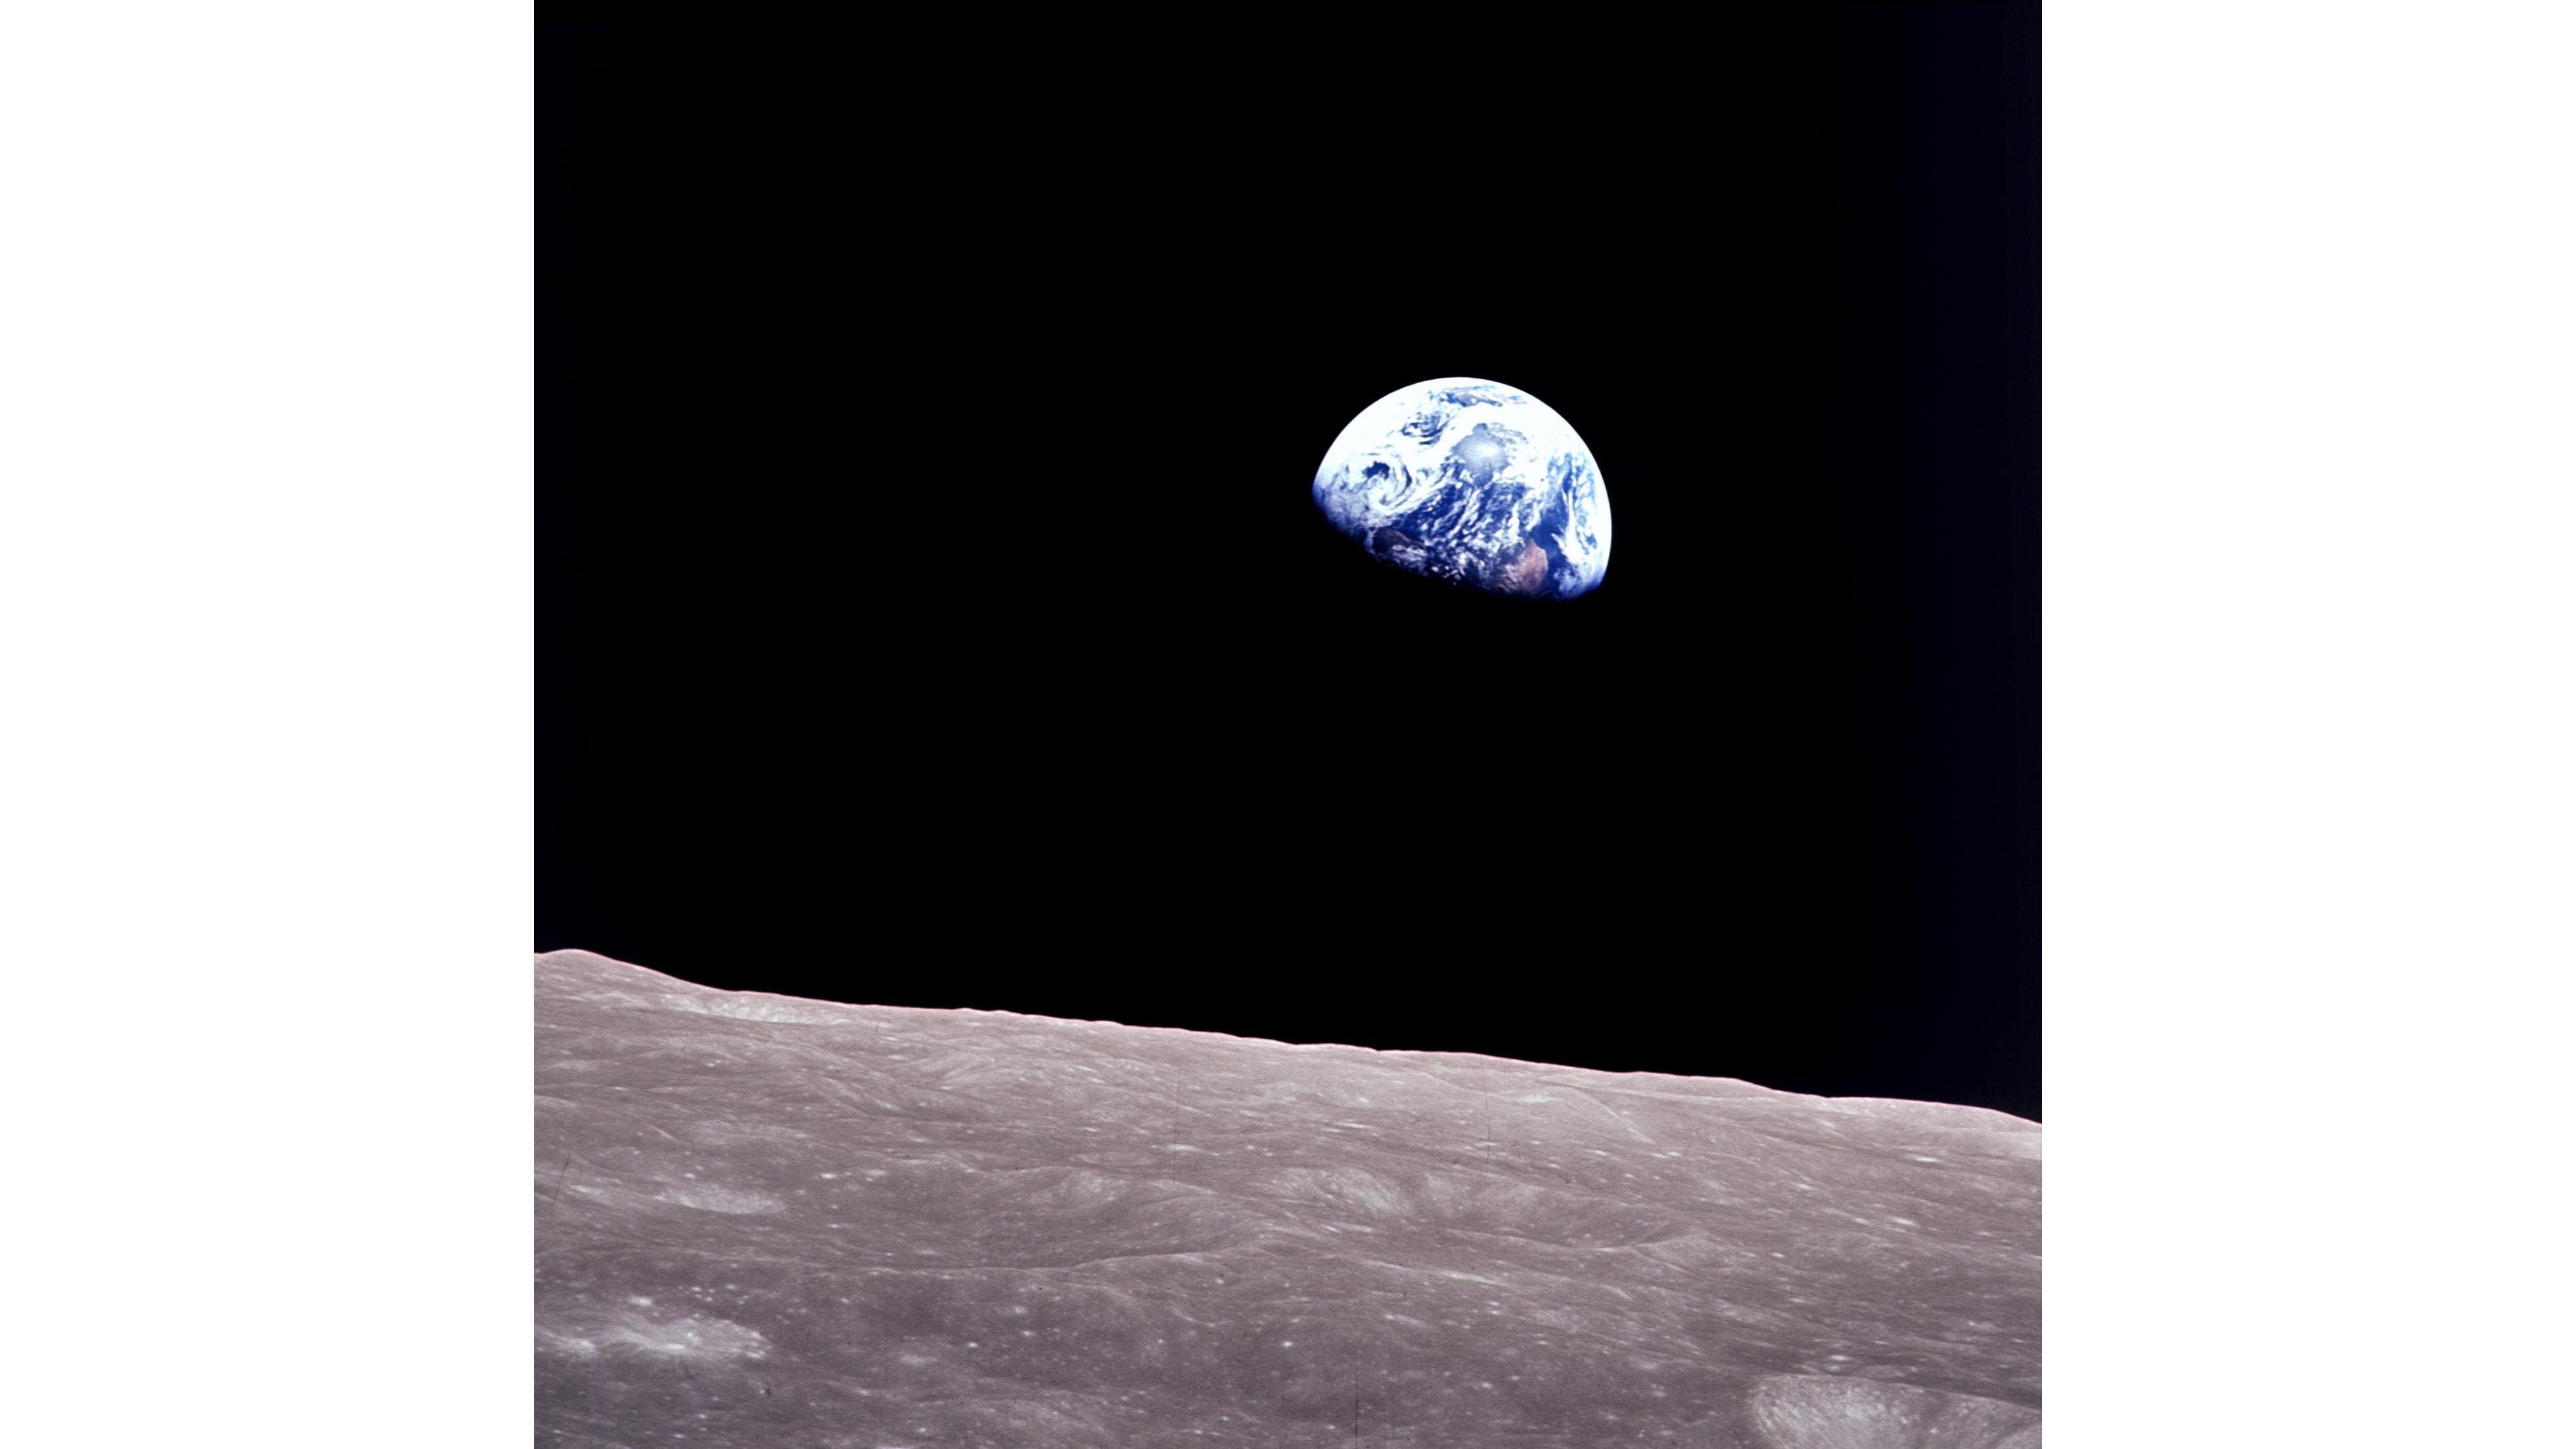 Taken aboard Apollo 8 by Bill Anders, this iconic picture shows Earth peeking out from beyond the lunar surface as the first crewed spacecraft circumnavigated the Moon.